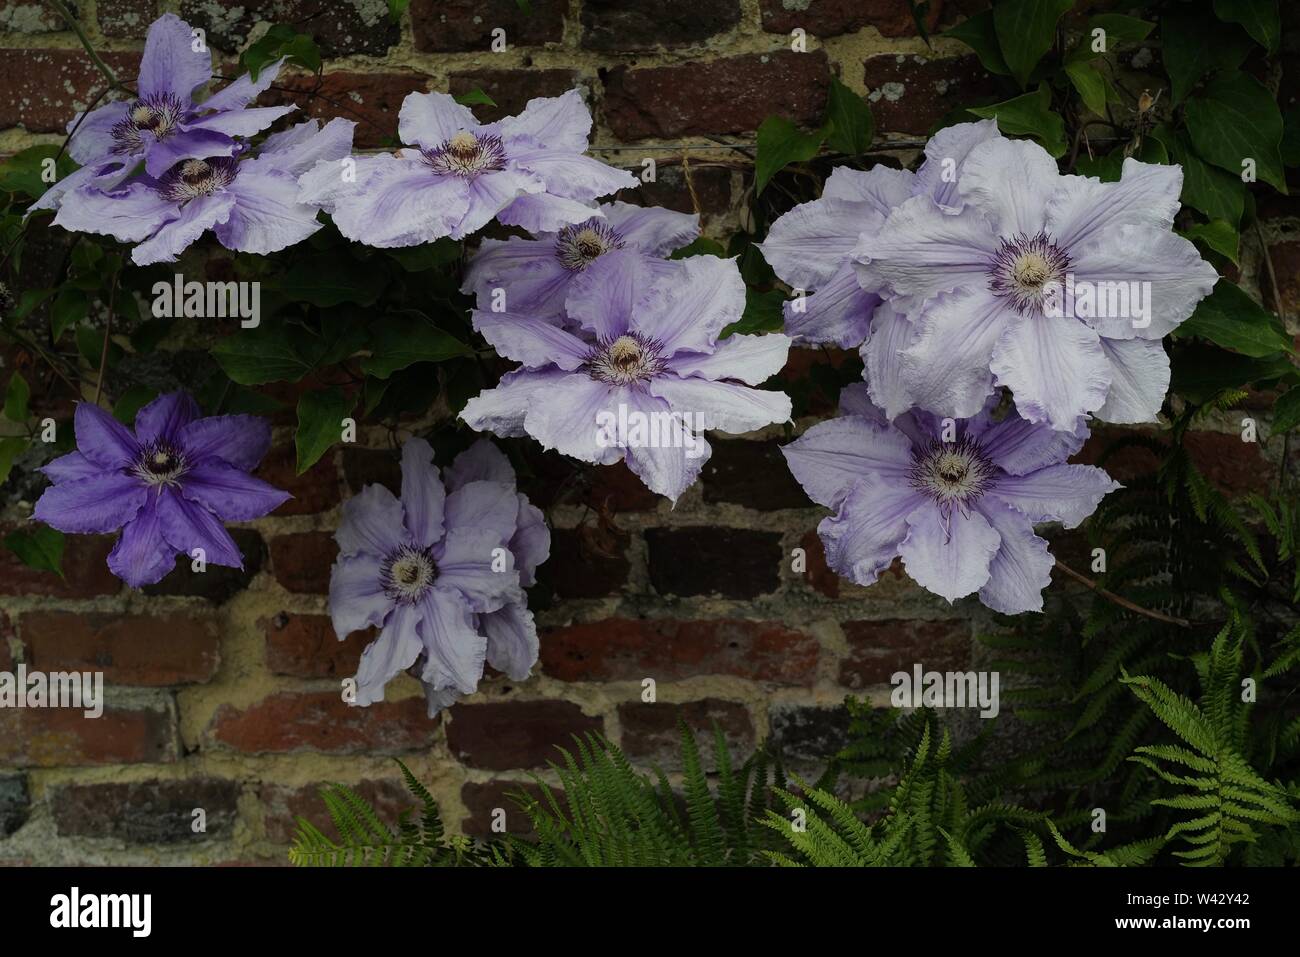 Large flowers of curly clematis (clematis crisps) in shades of purple colour against a red brick wall Stock Photo